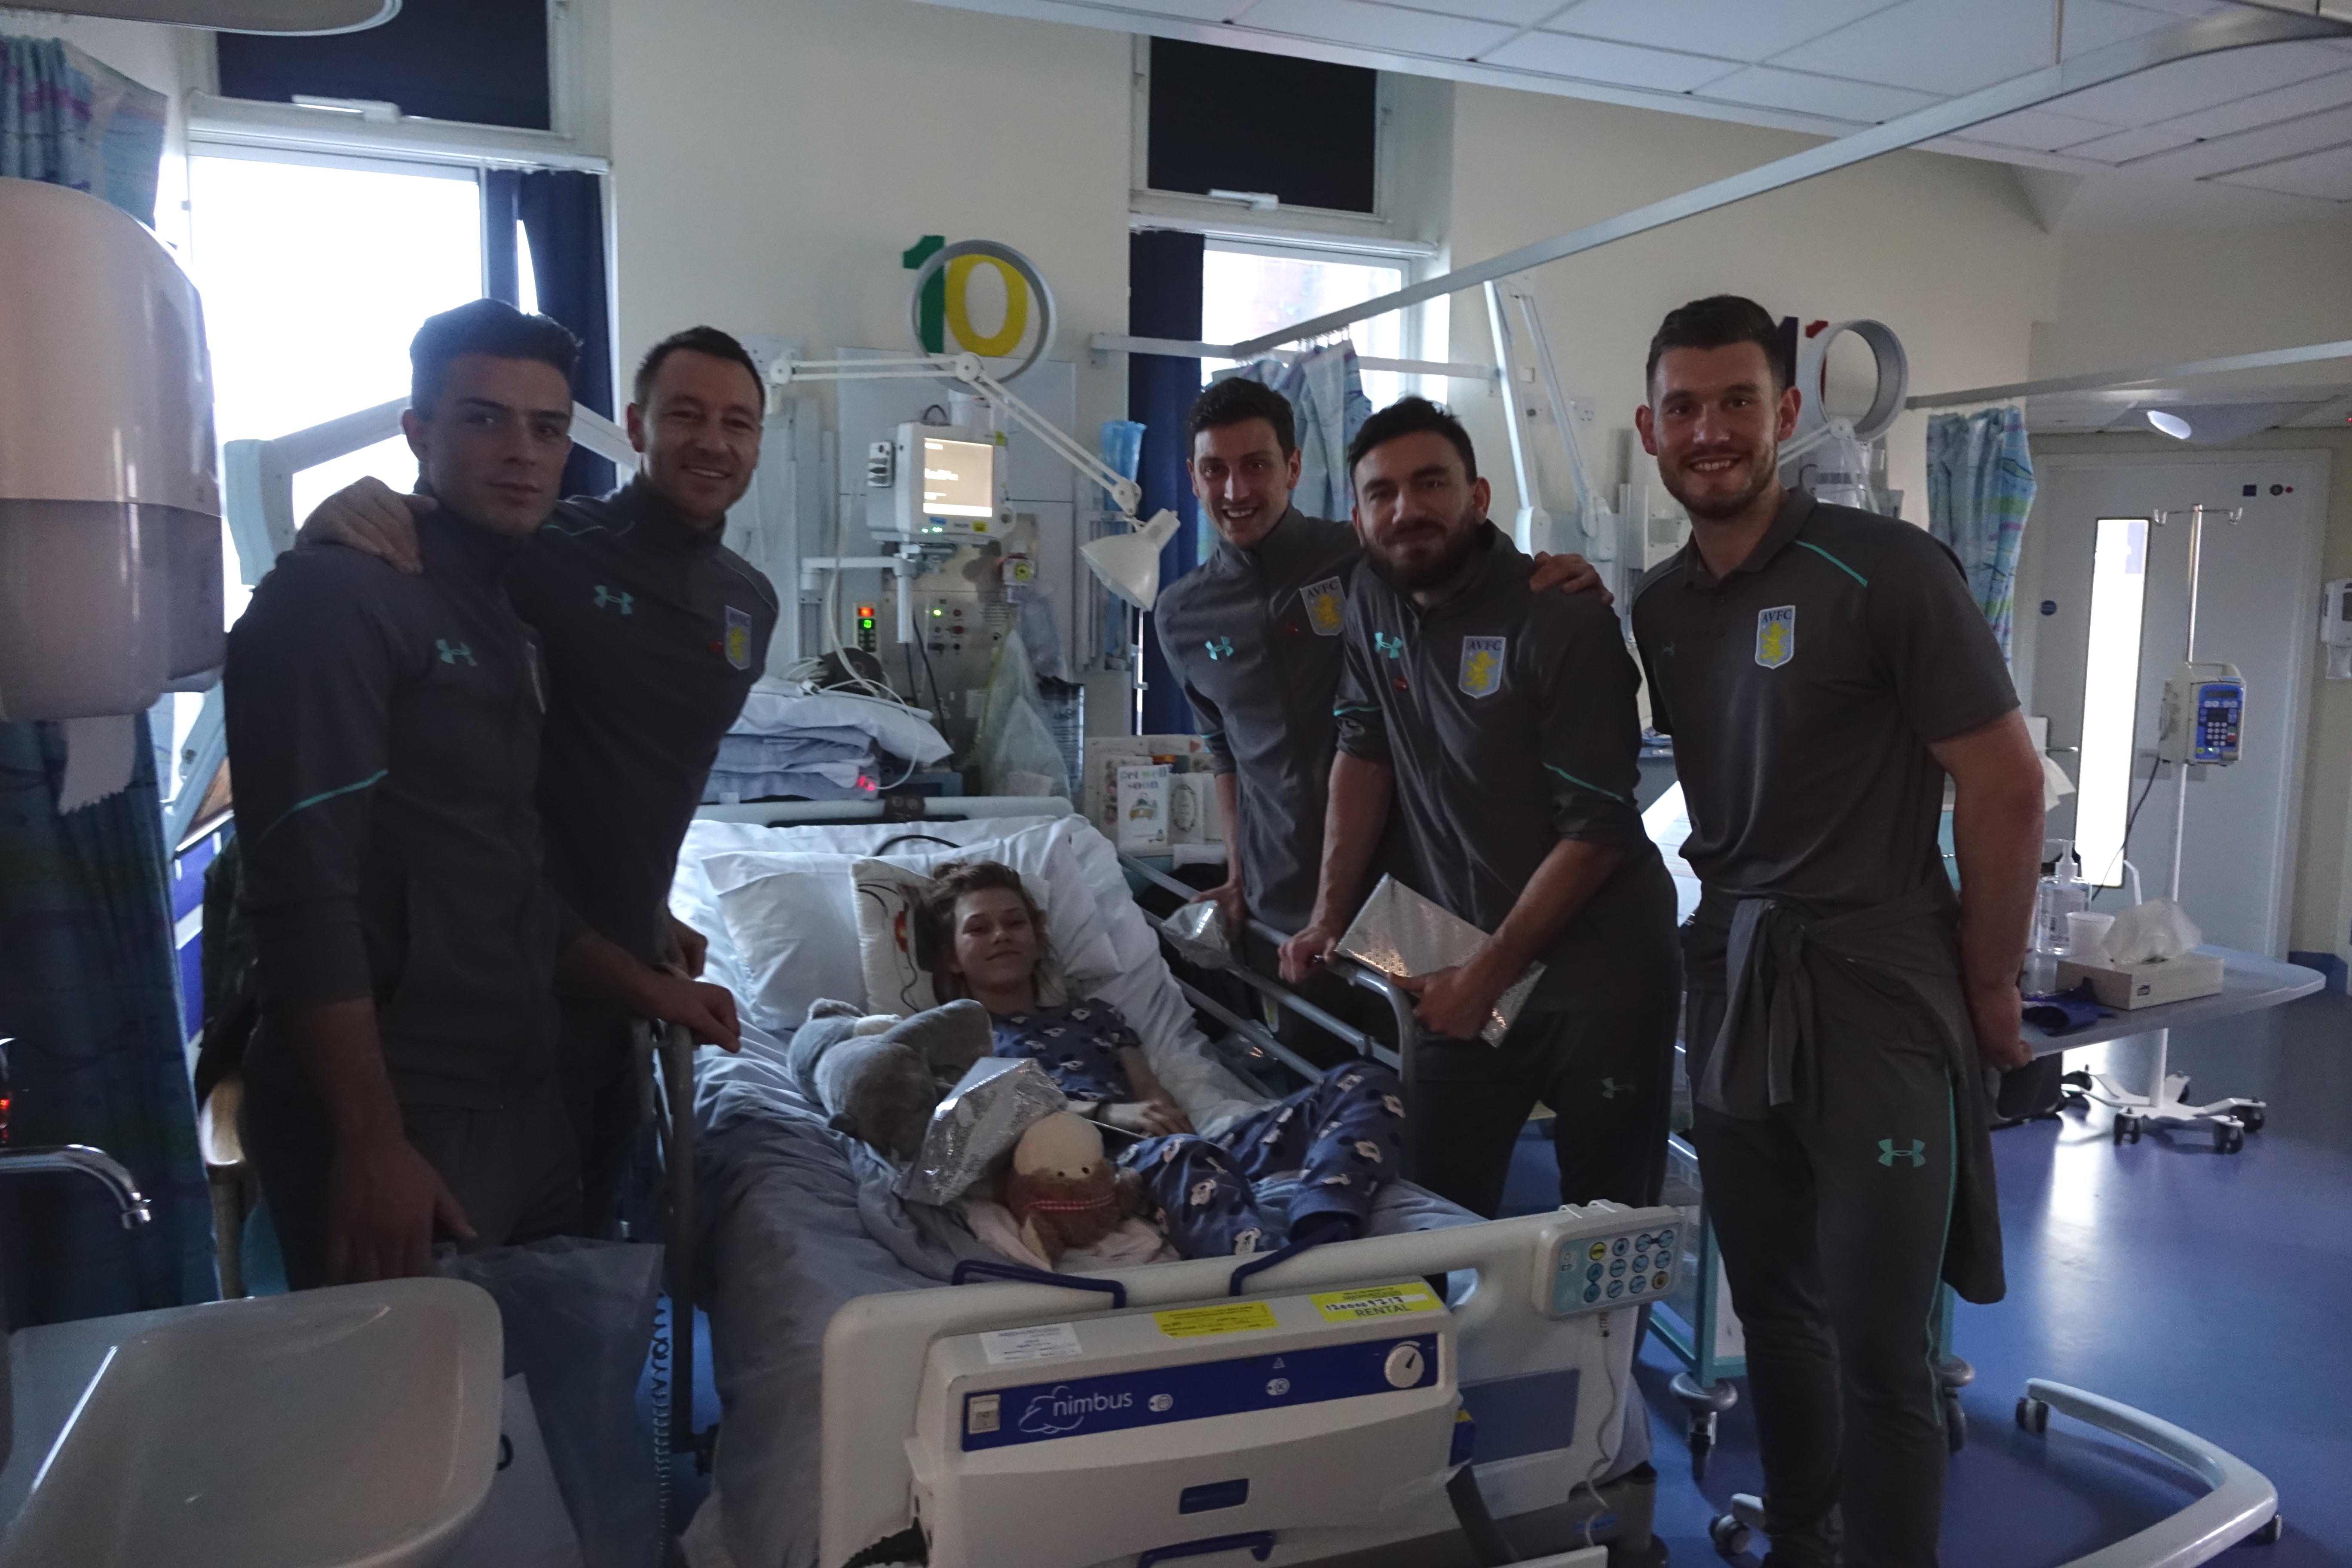 Aston Villa players paid a visit to Birmingham Children's Hospital to deliver gifts and good will